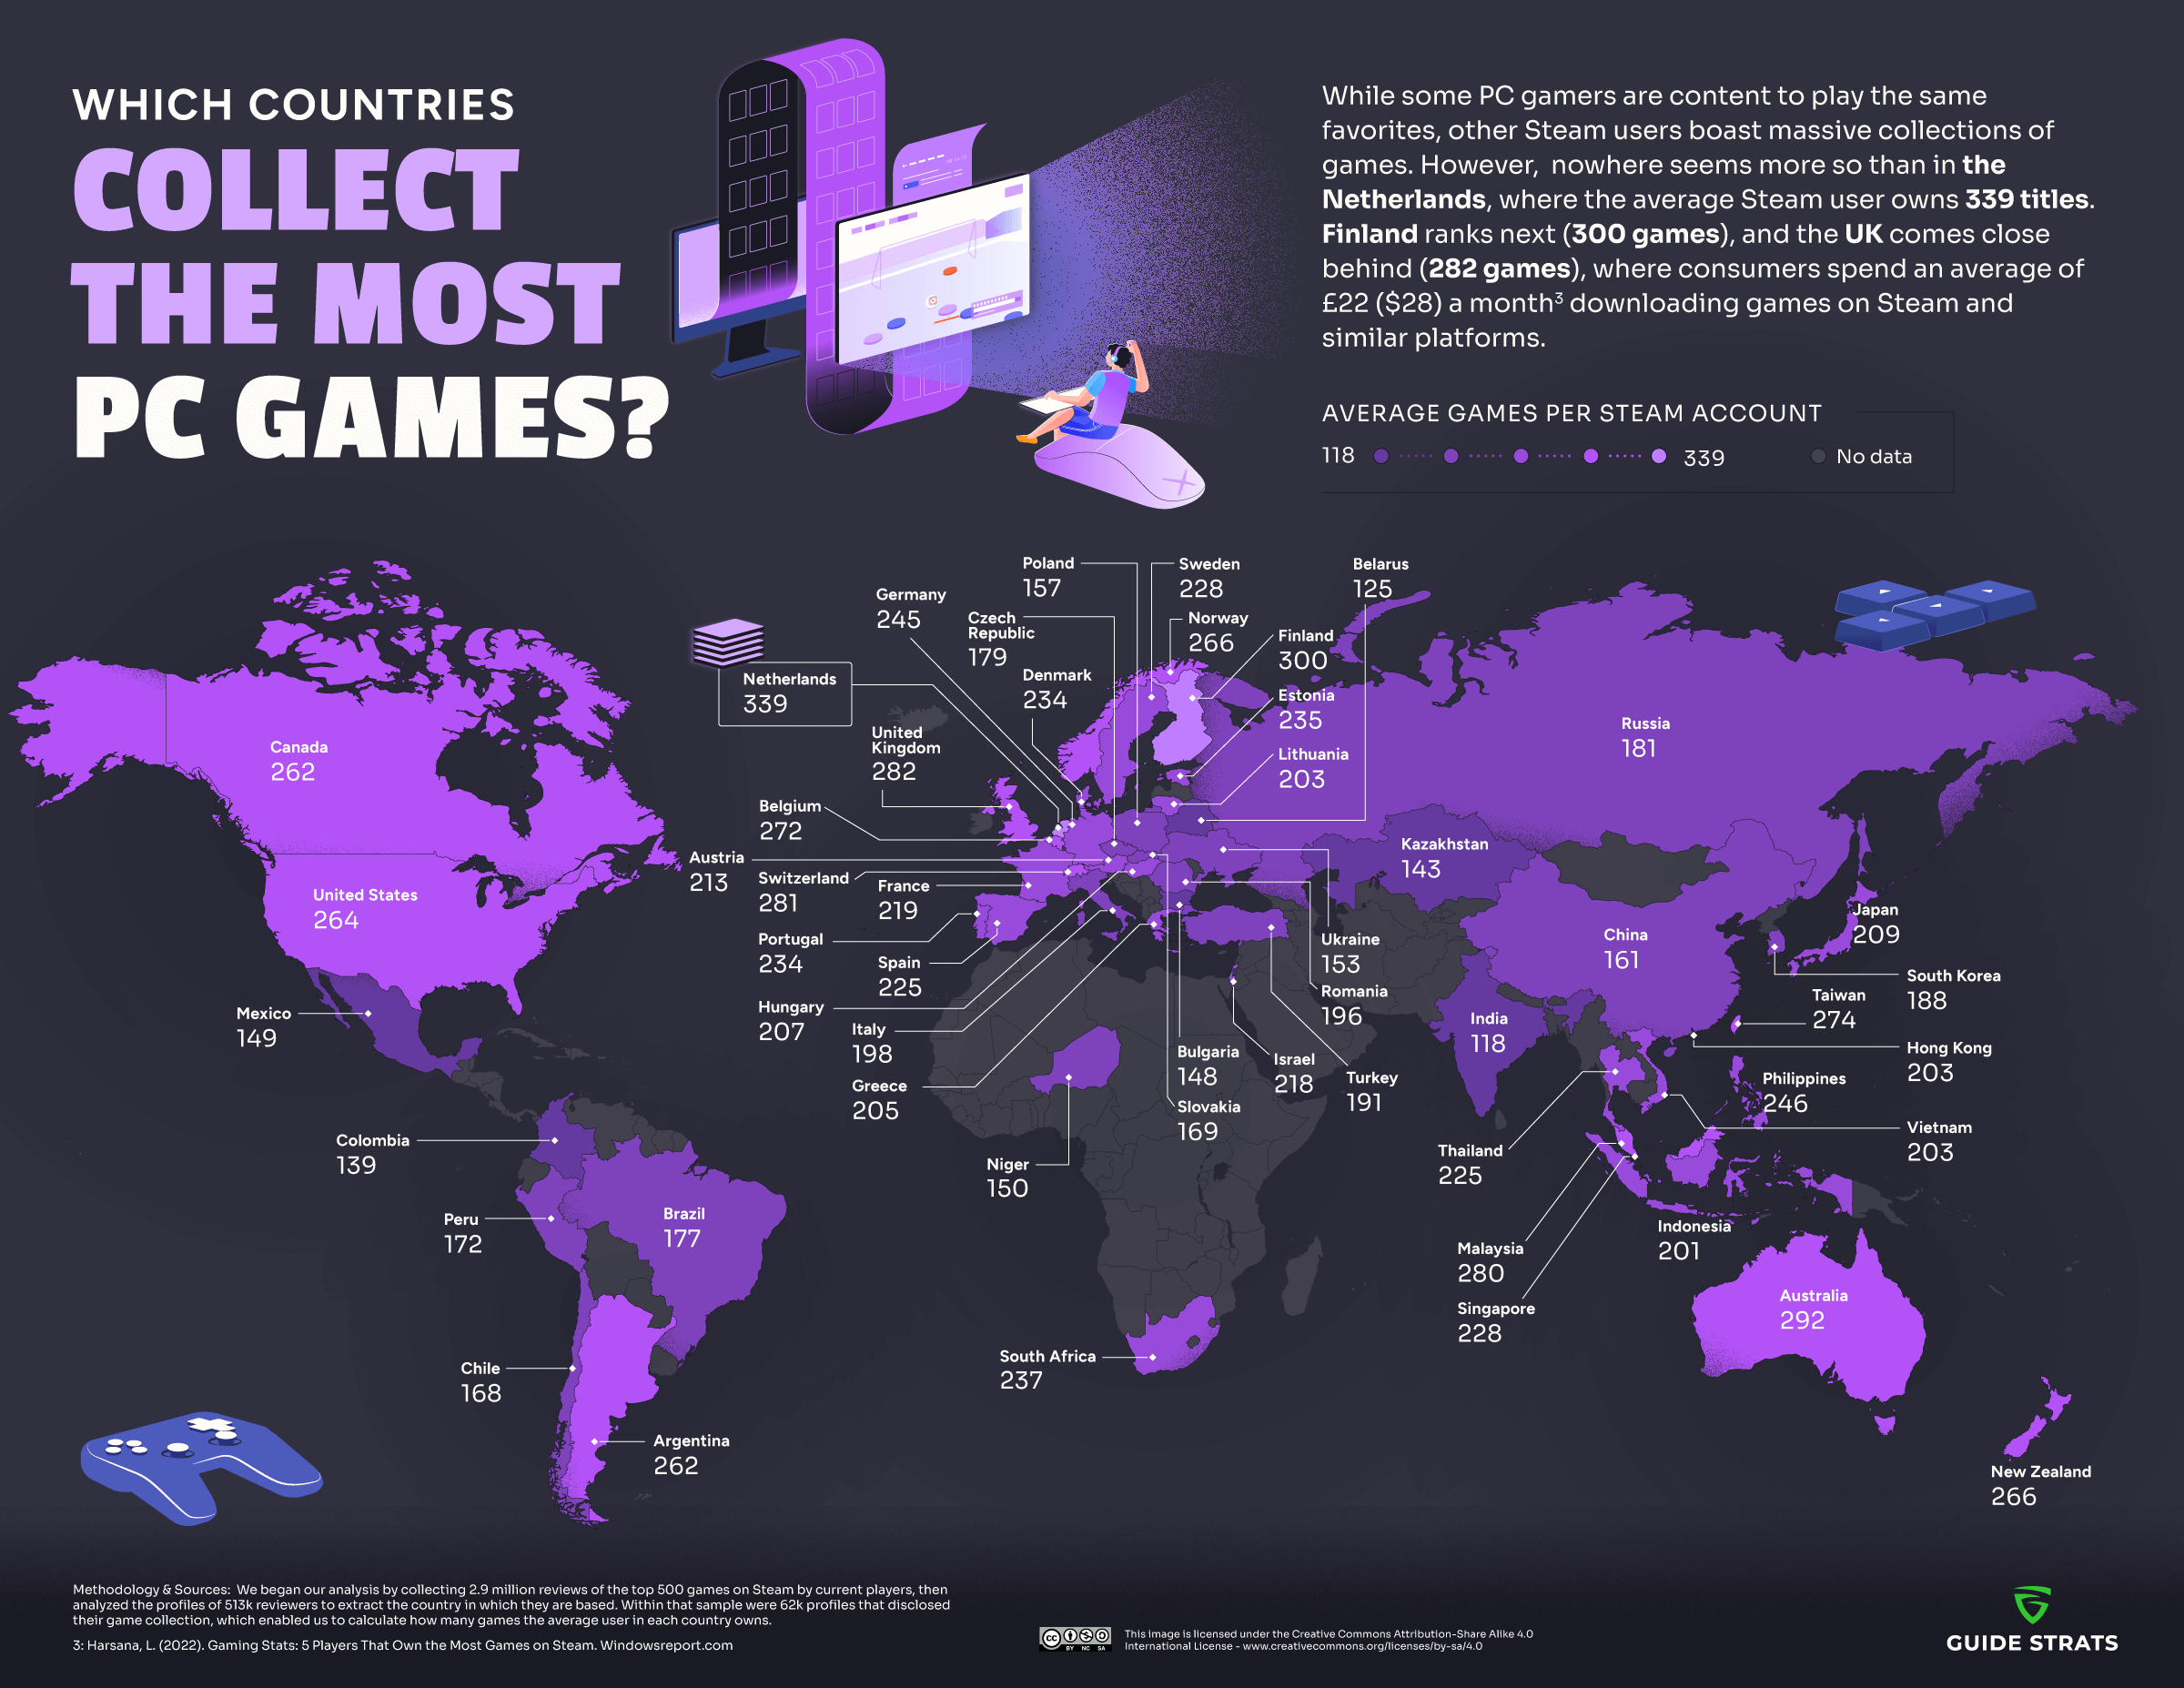 Which Countries Have the Most PC Games?